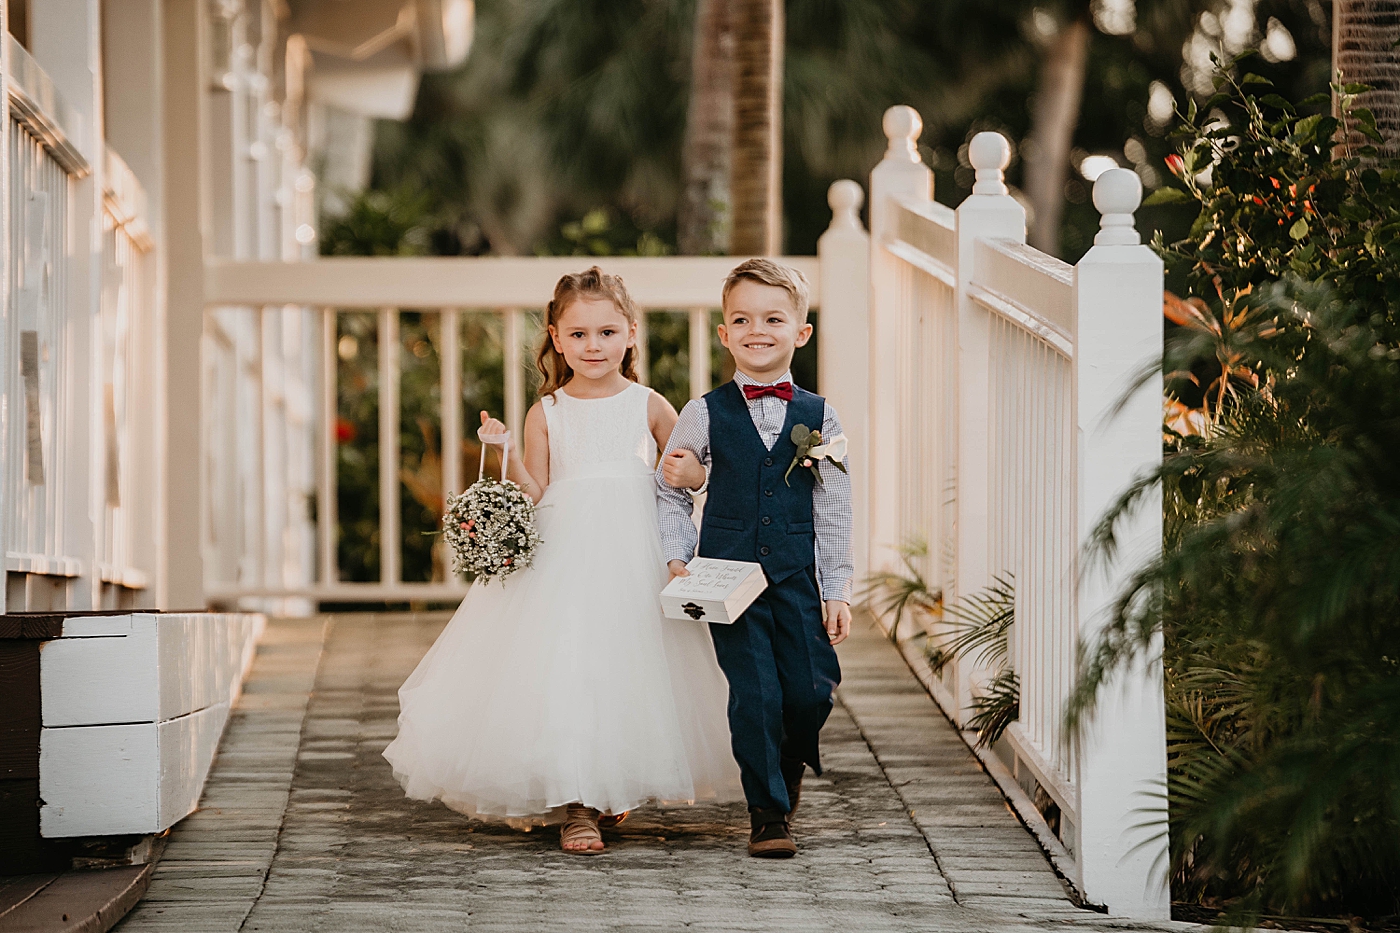 Flower girl and ring bearer portrait Out of the Blue Celebrations Wedding Photography captured by South Florida Wedding Photographer Krystal Capone Photography 